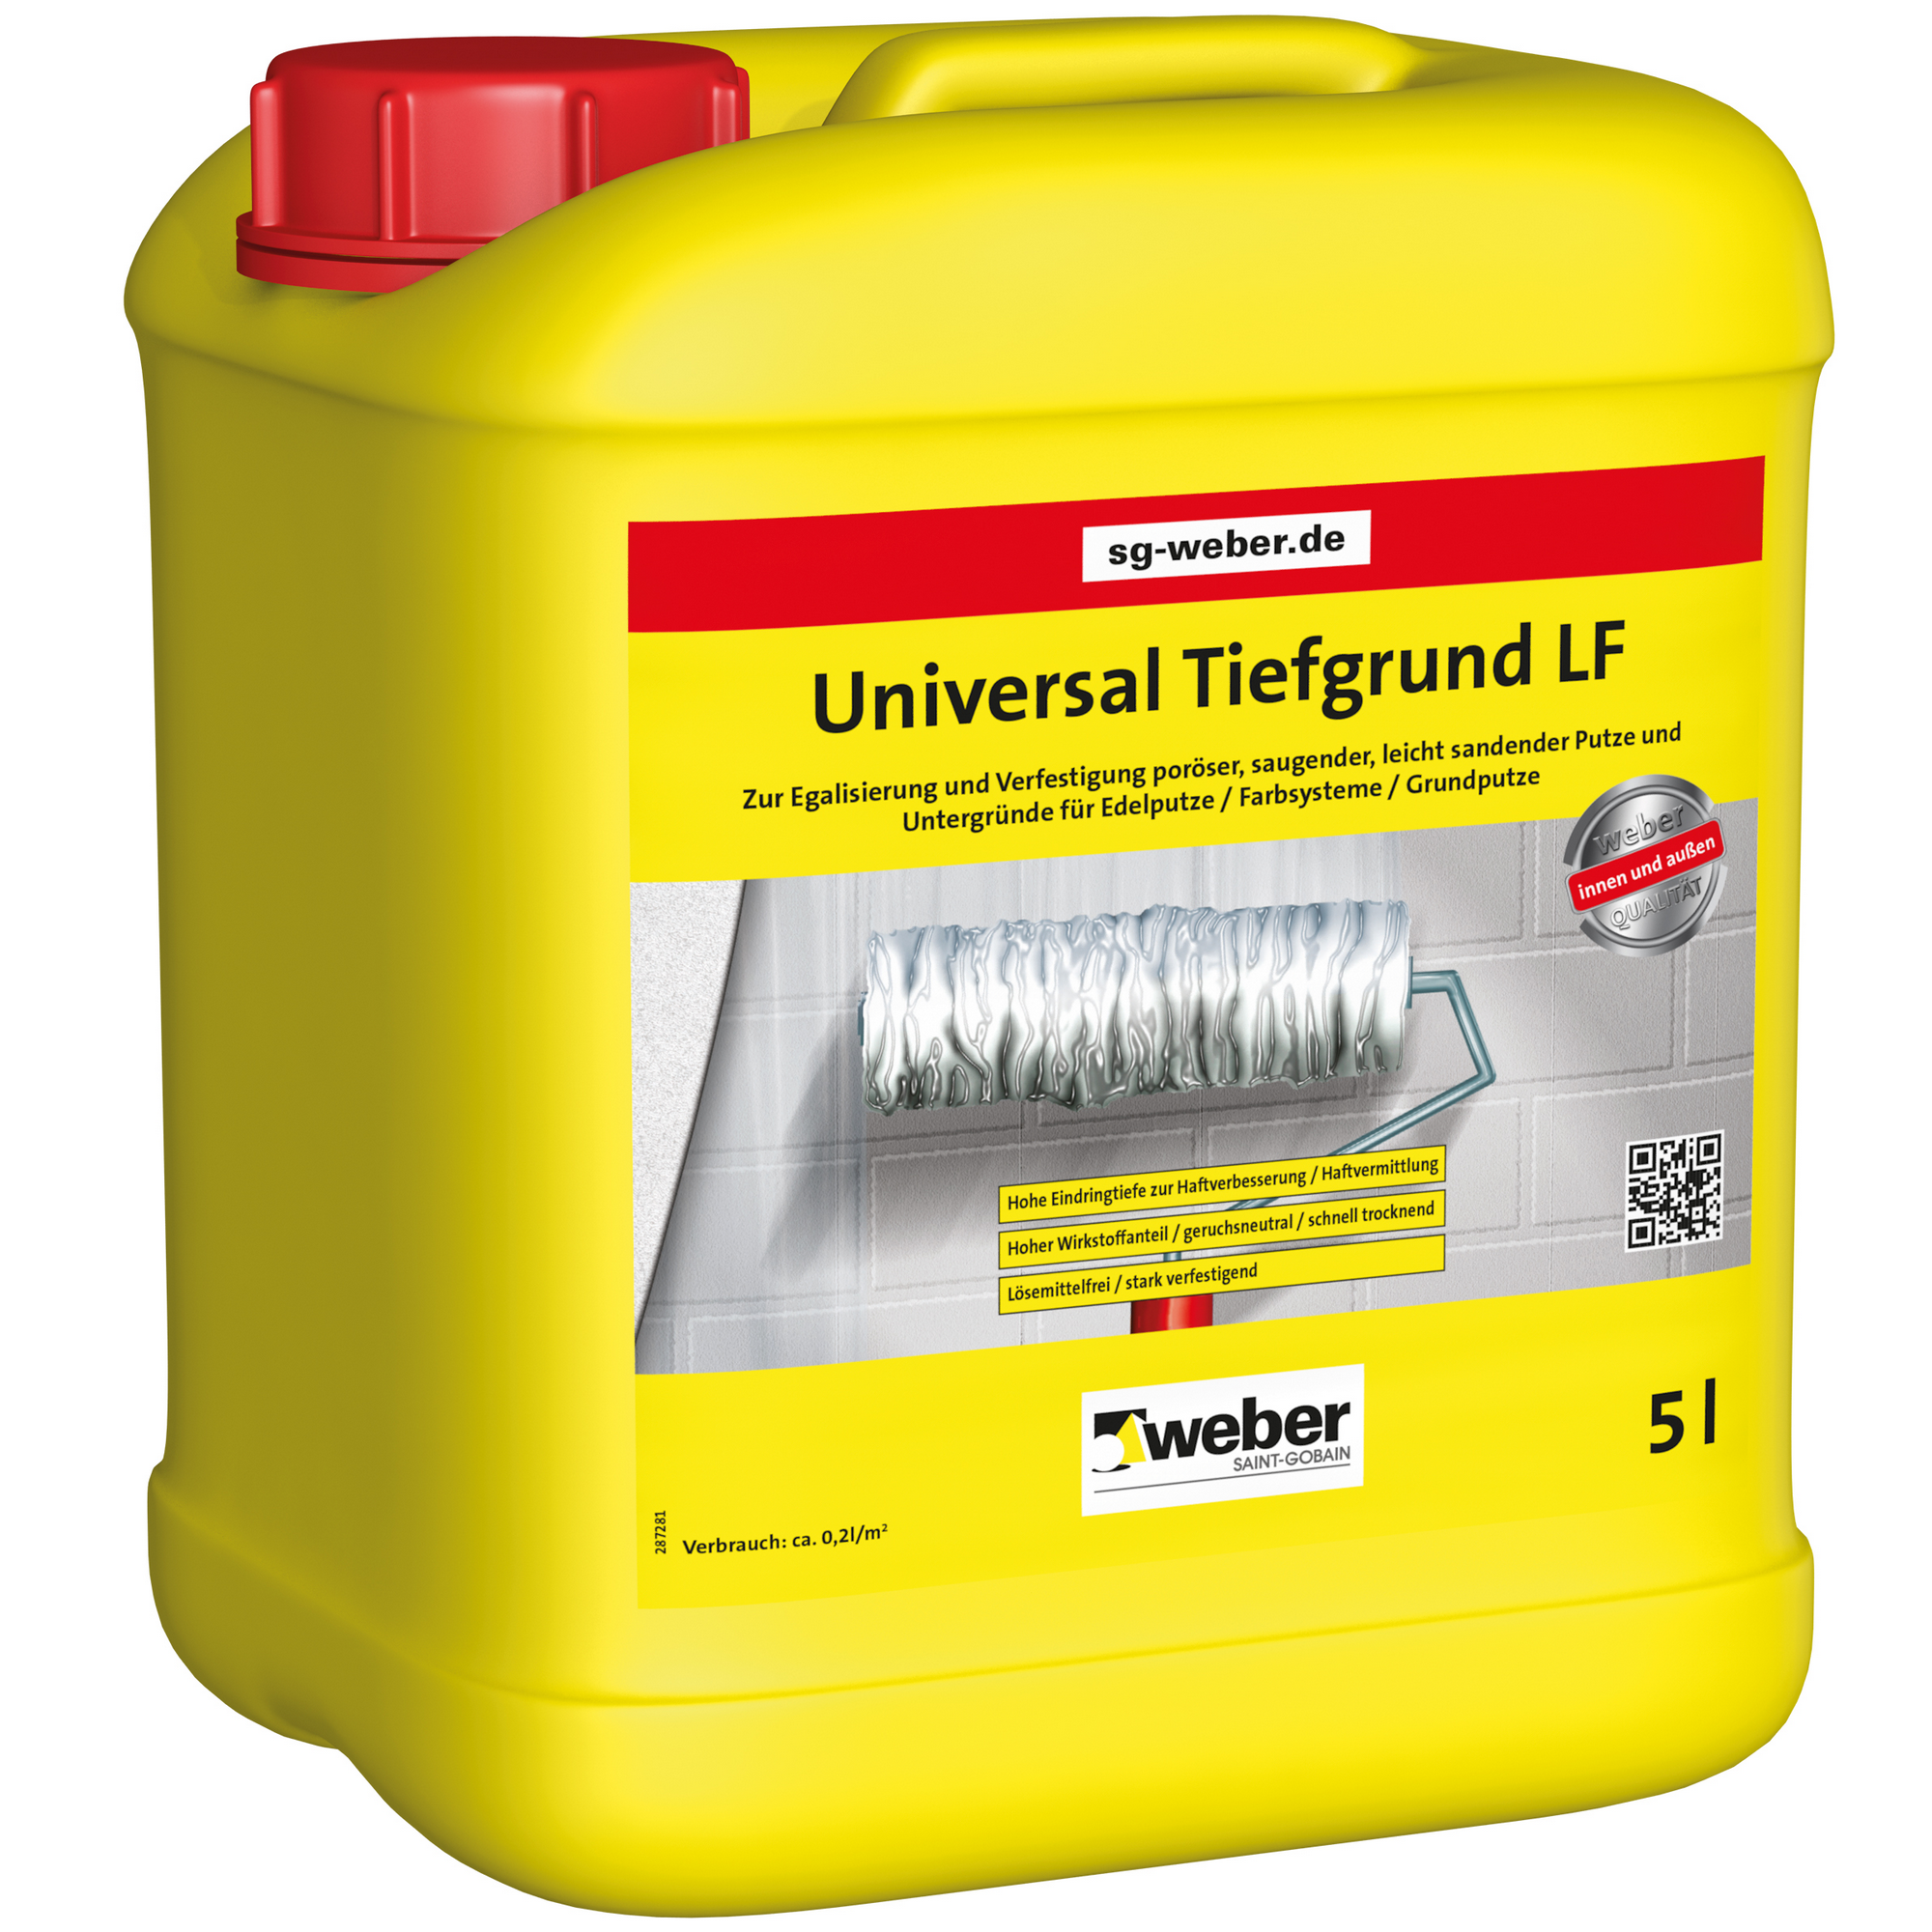 Universal Tiefgrund 'LF' 5 l + product picture